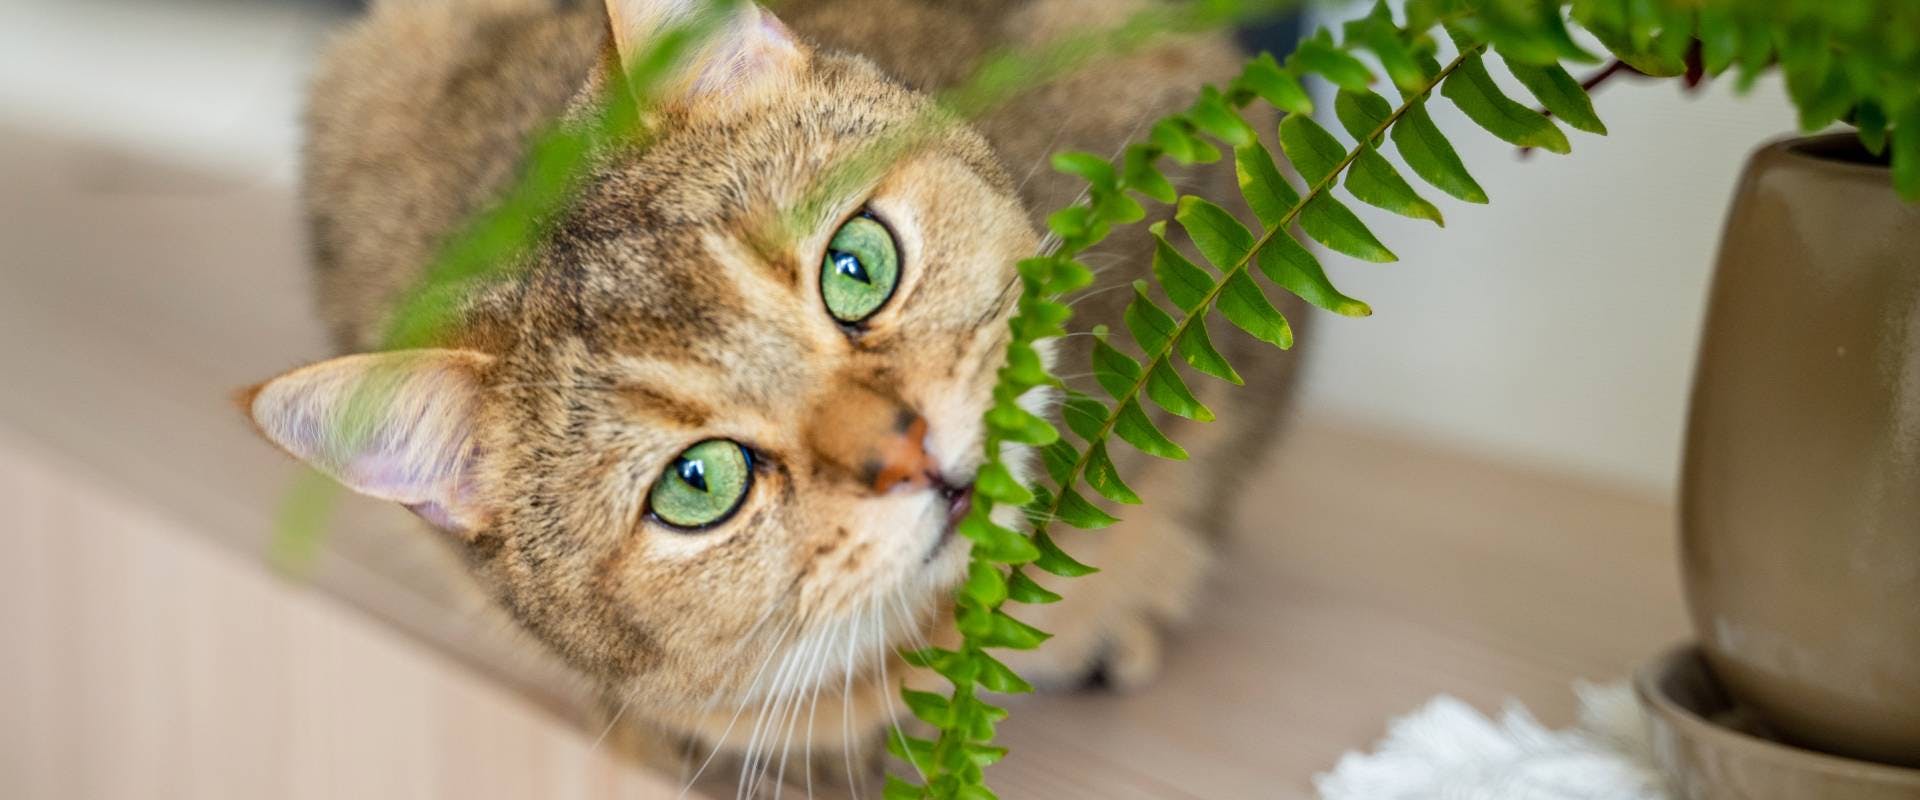 A cat with a fern.